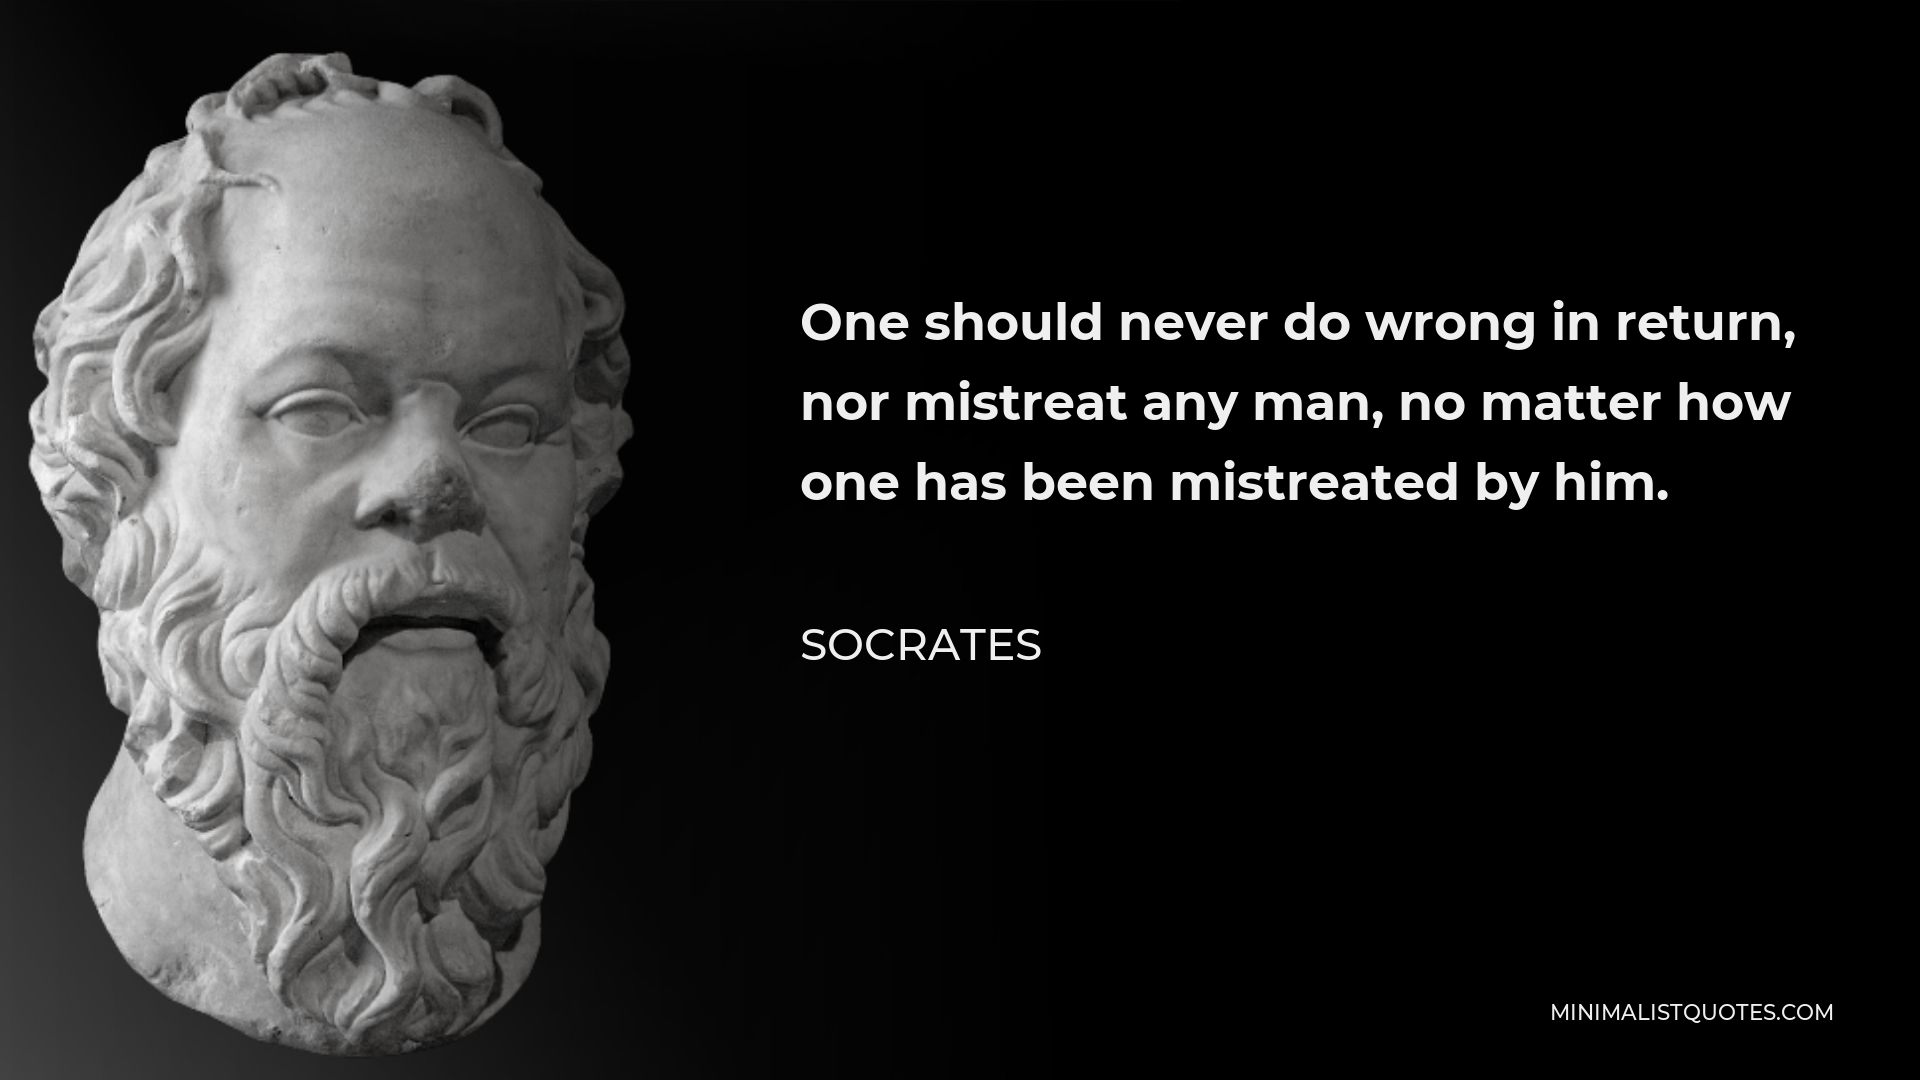 Socrates Quote: One should never do wrong in return, nor mistreat any ...